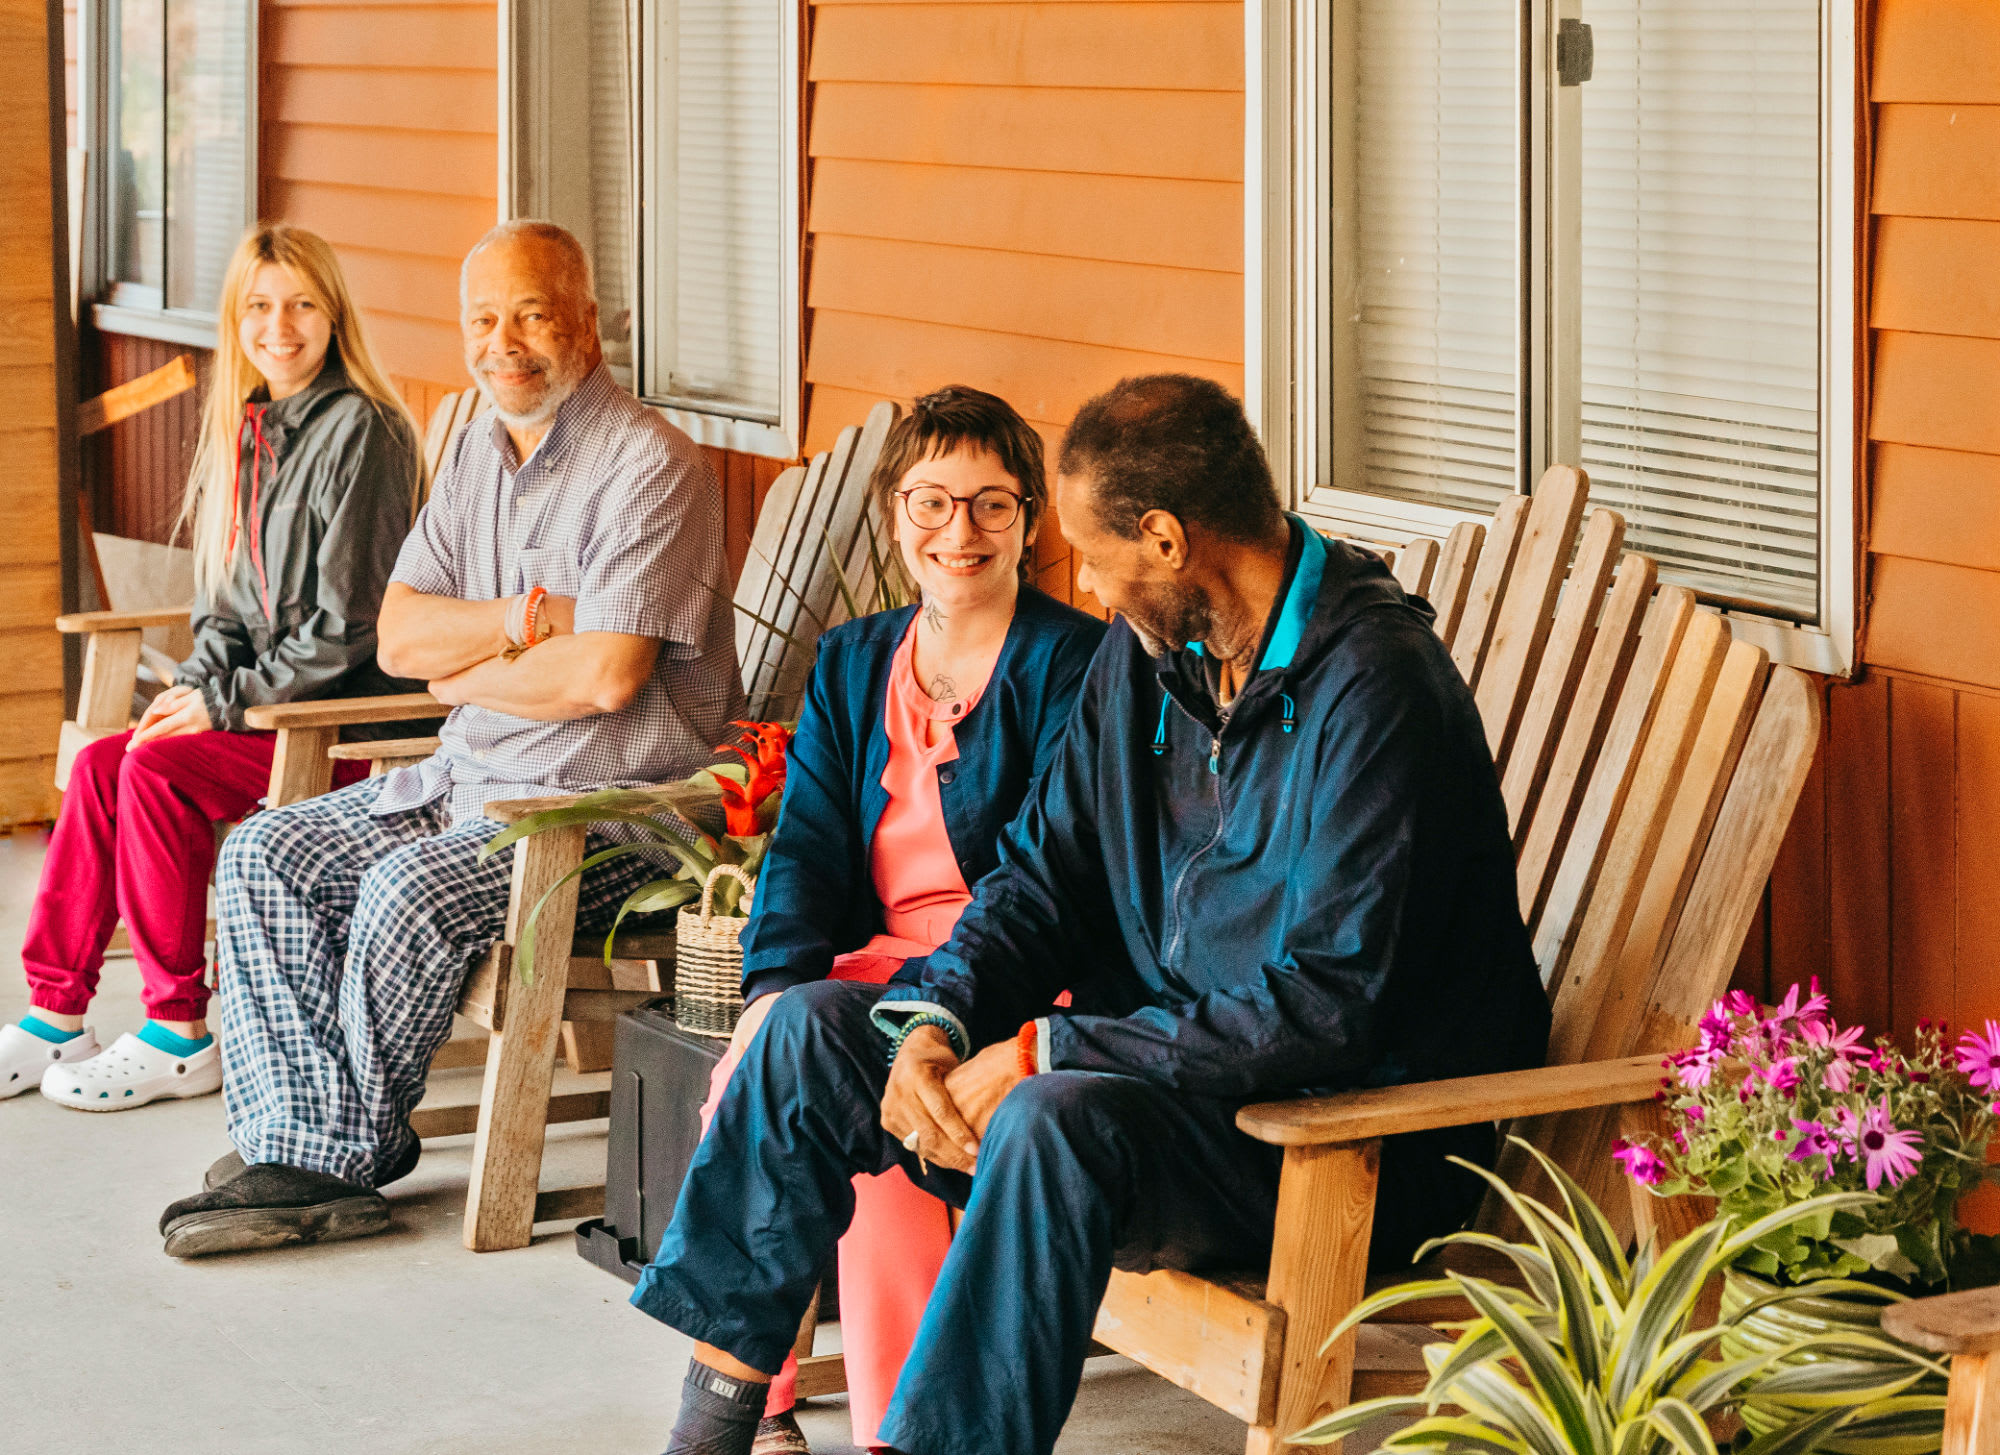 Residents socializing on the porch at 6th Ave Senior Living in Tacoma, Washington